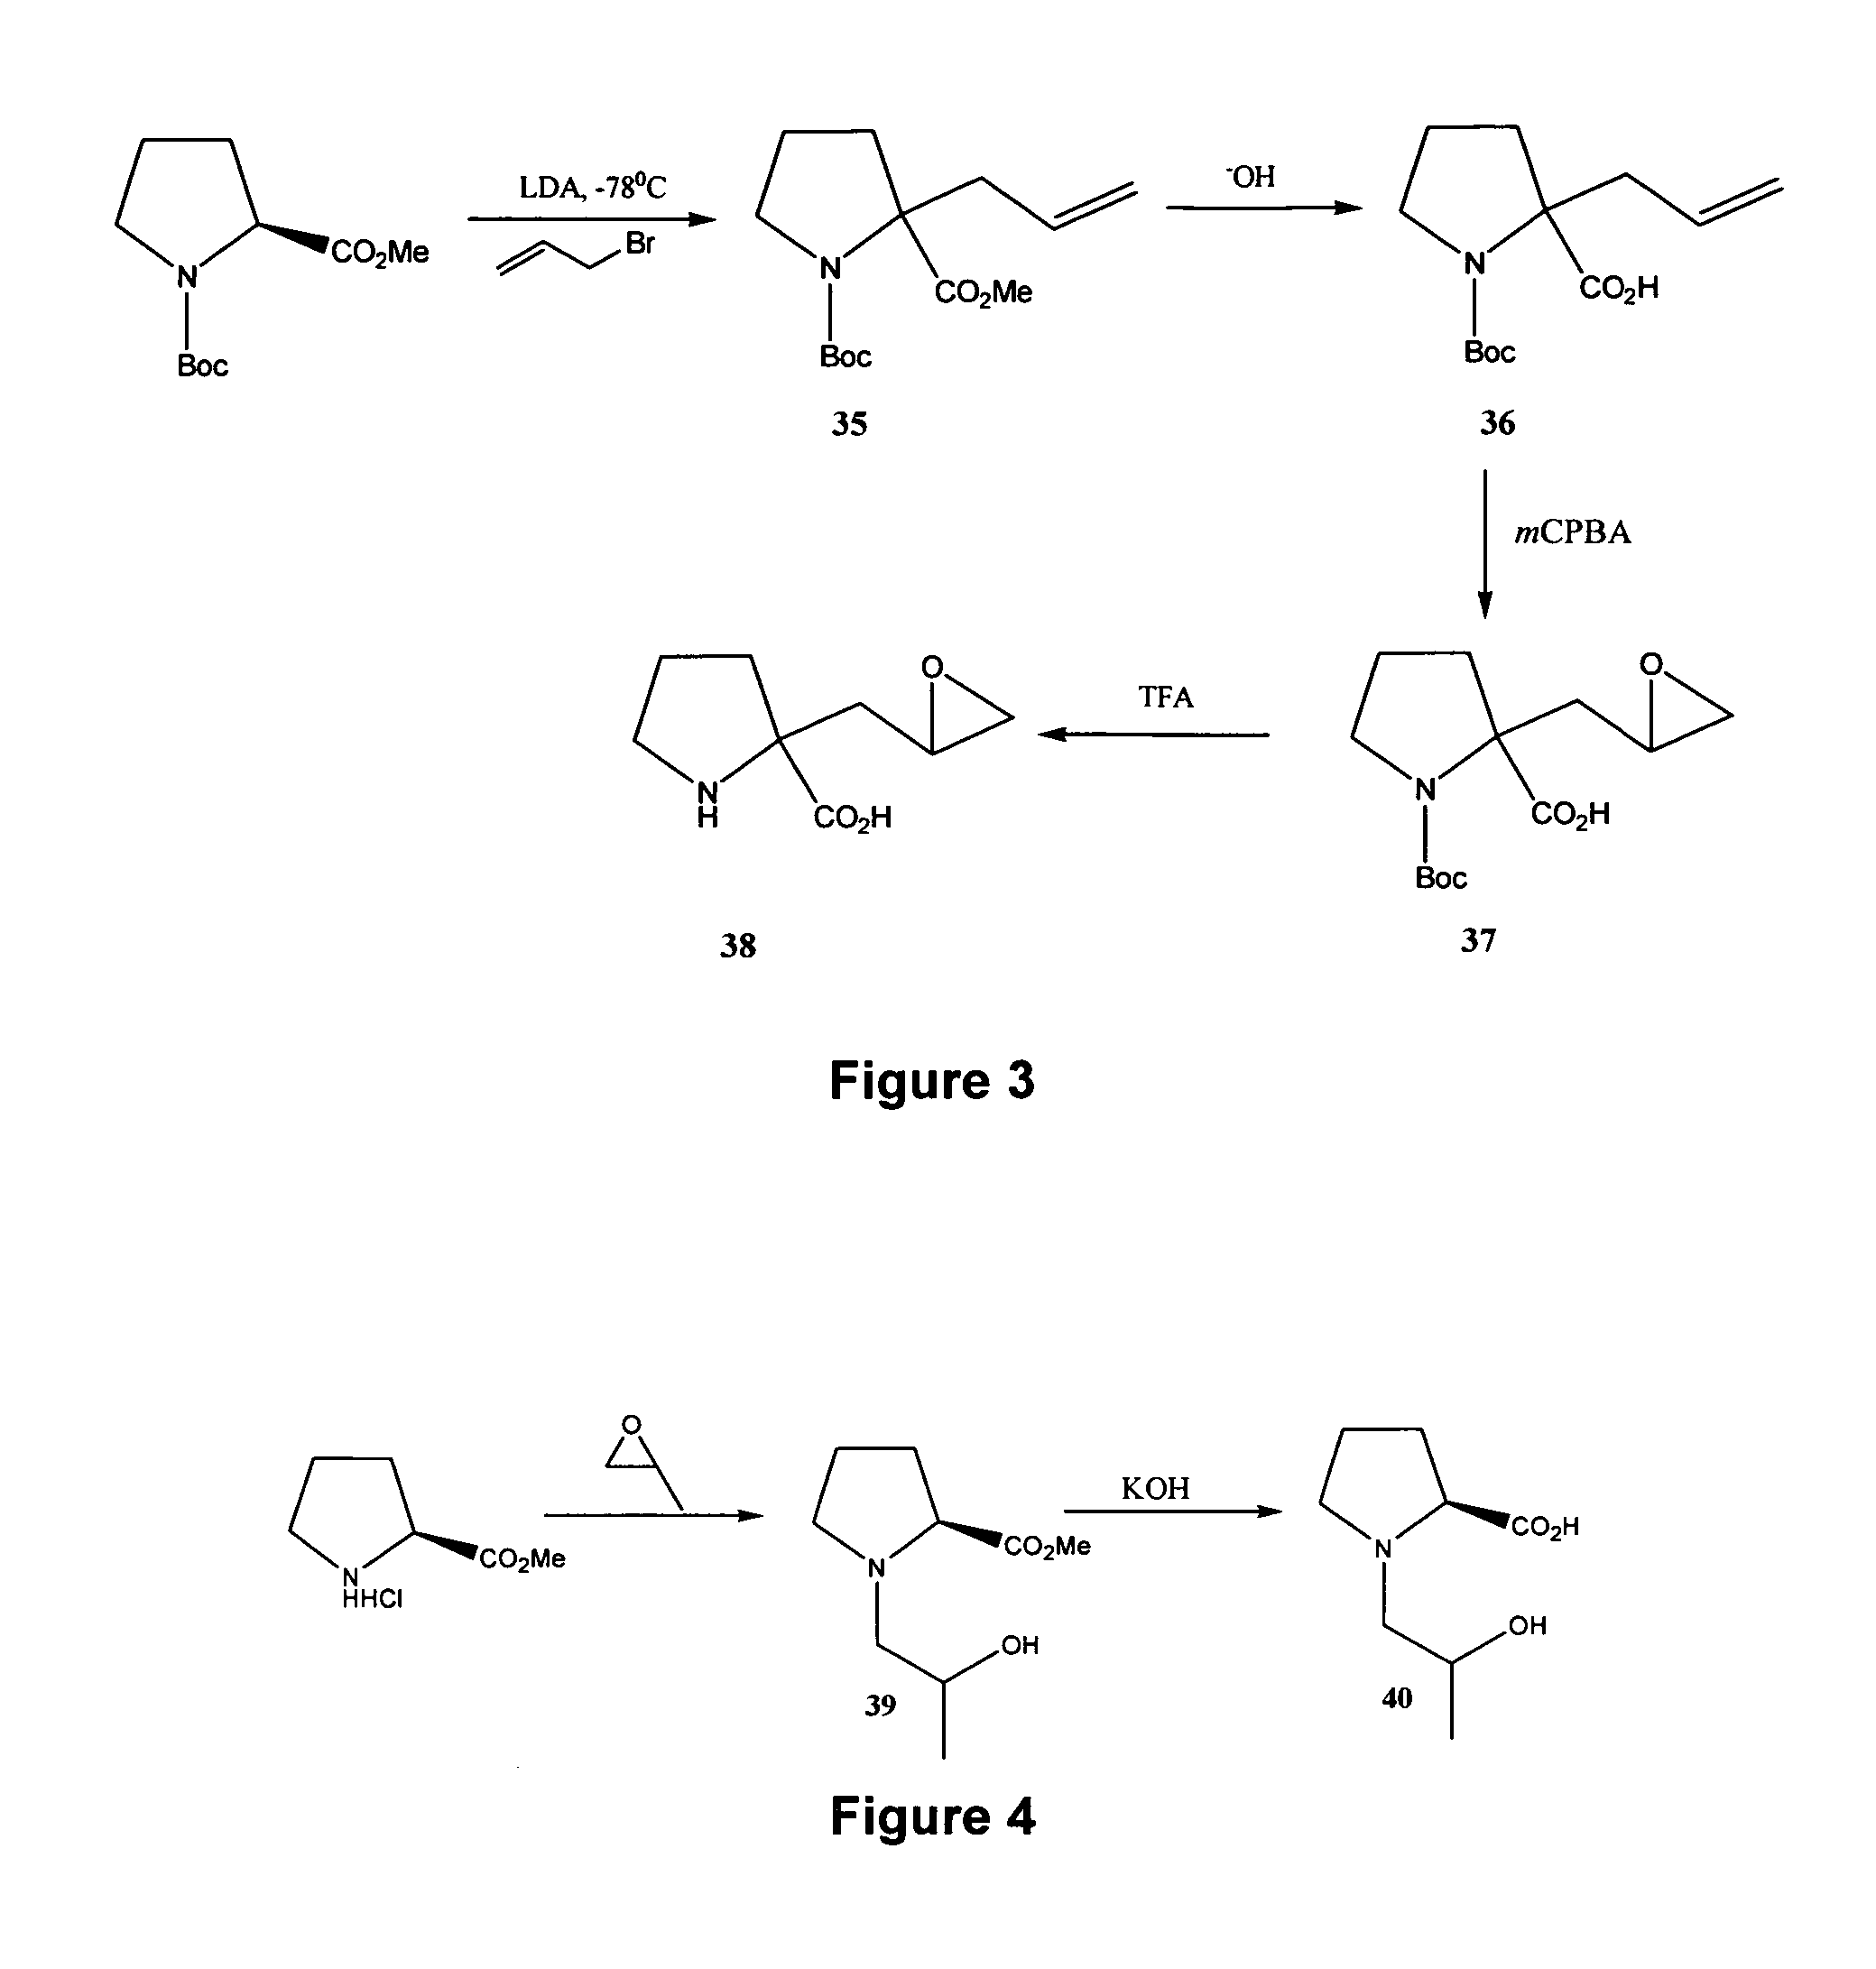 Analogs of 4-hydroxyisoleucine and uses thereof